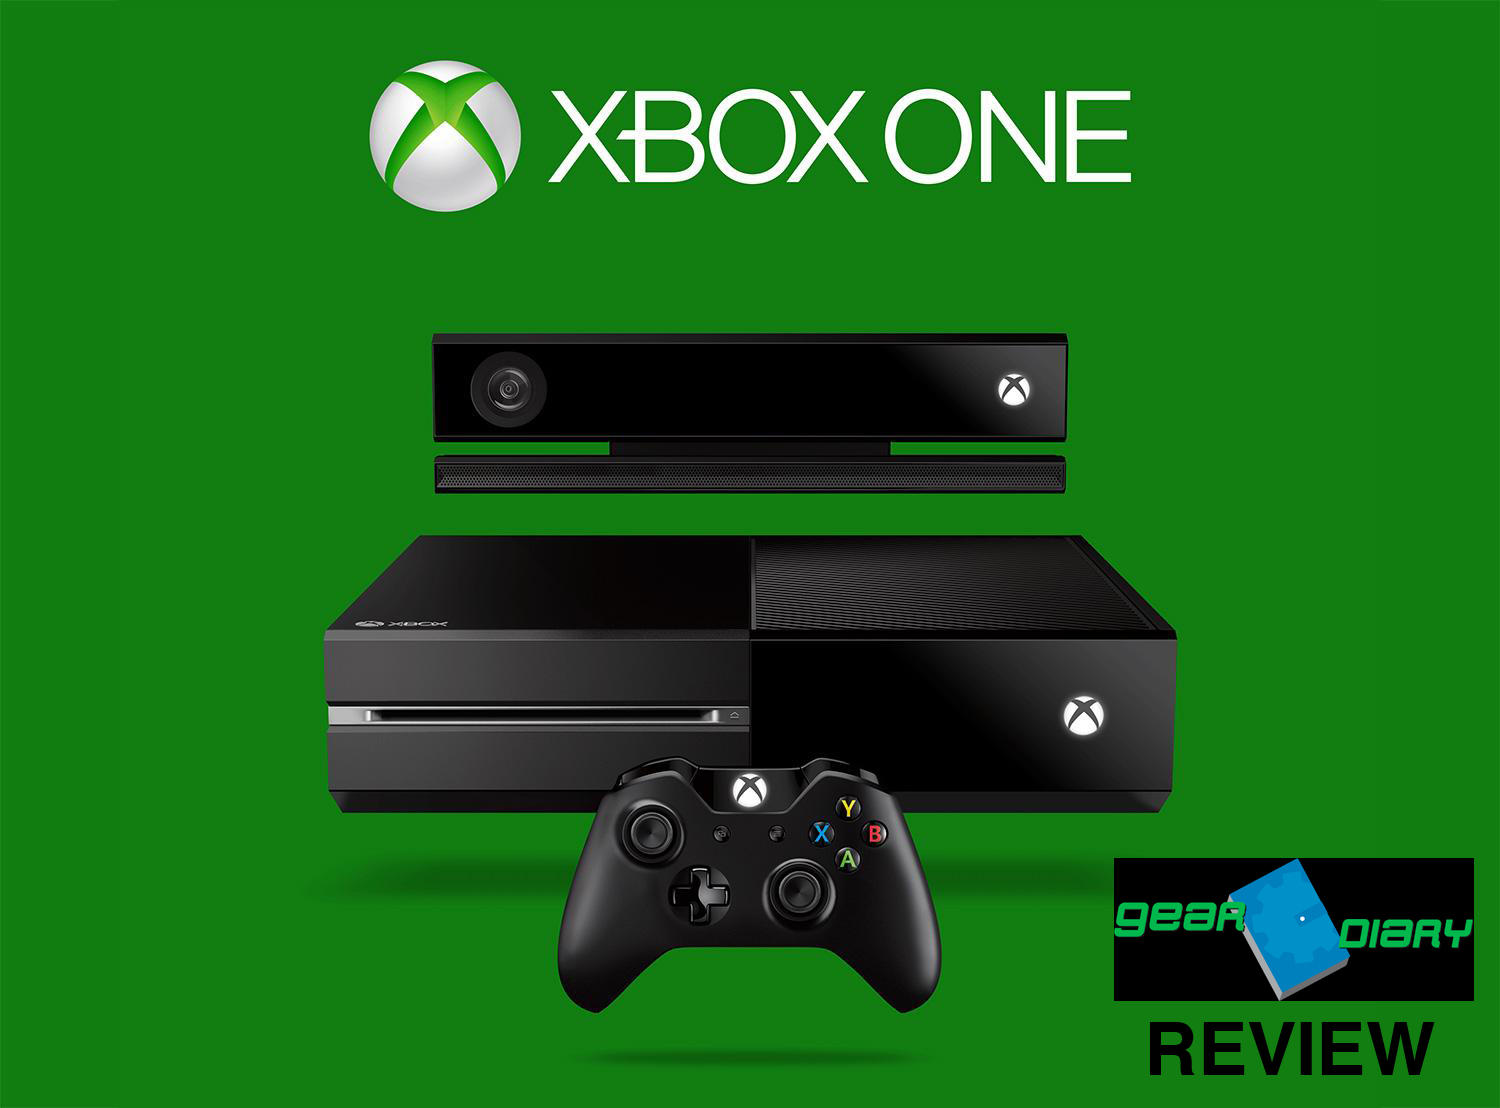 Xbox One Game Console Review - An Impressive Step into the Next Generation of Gaming